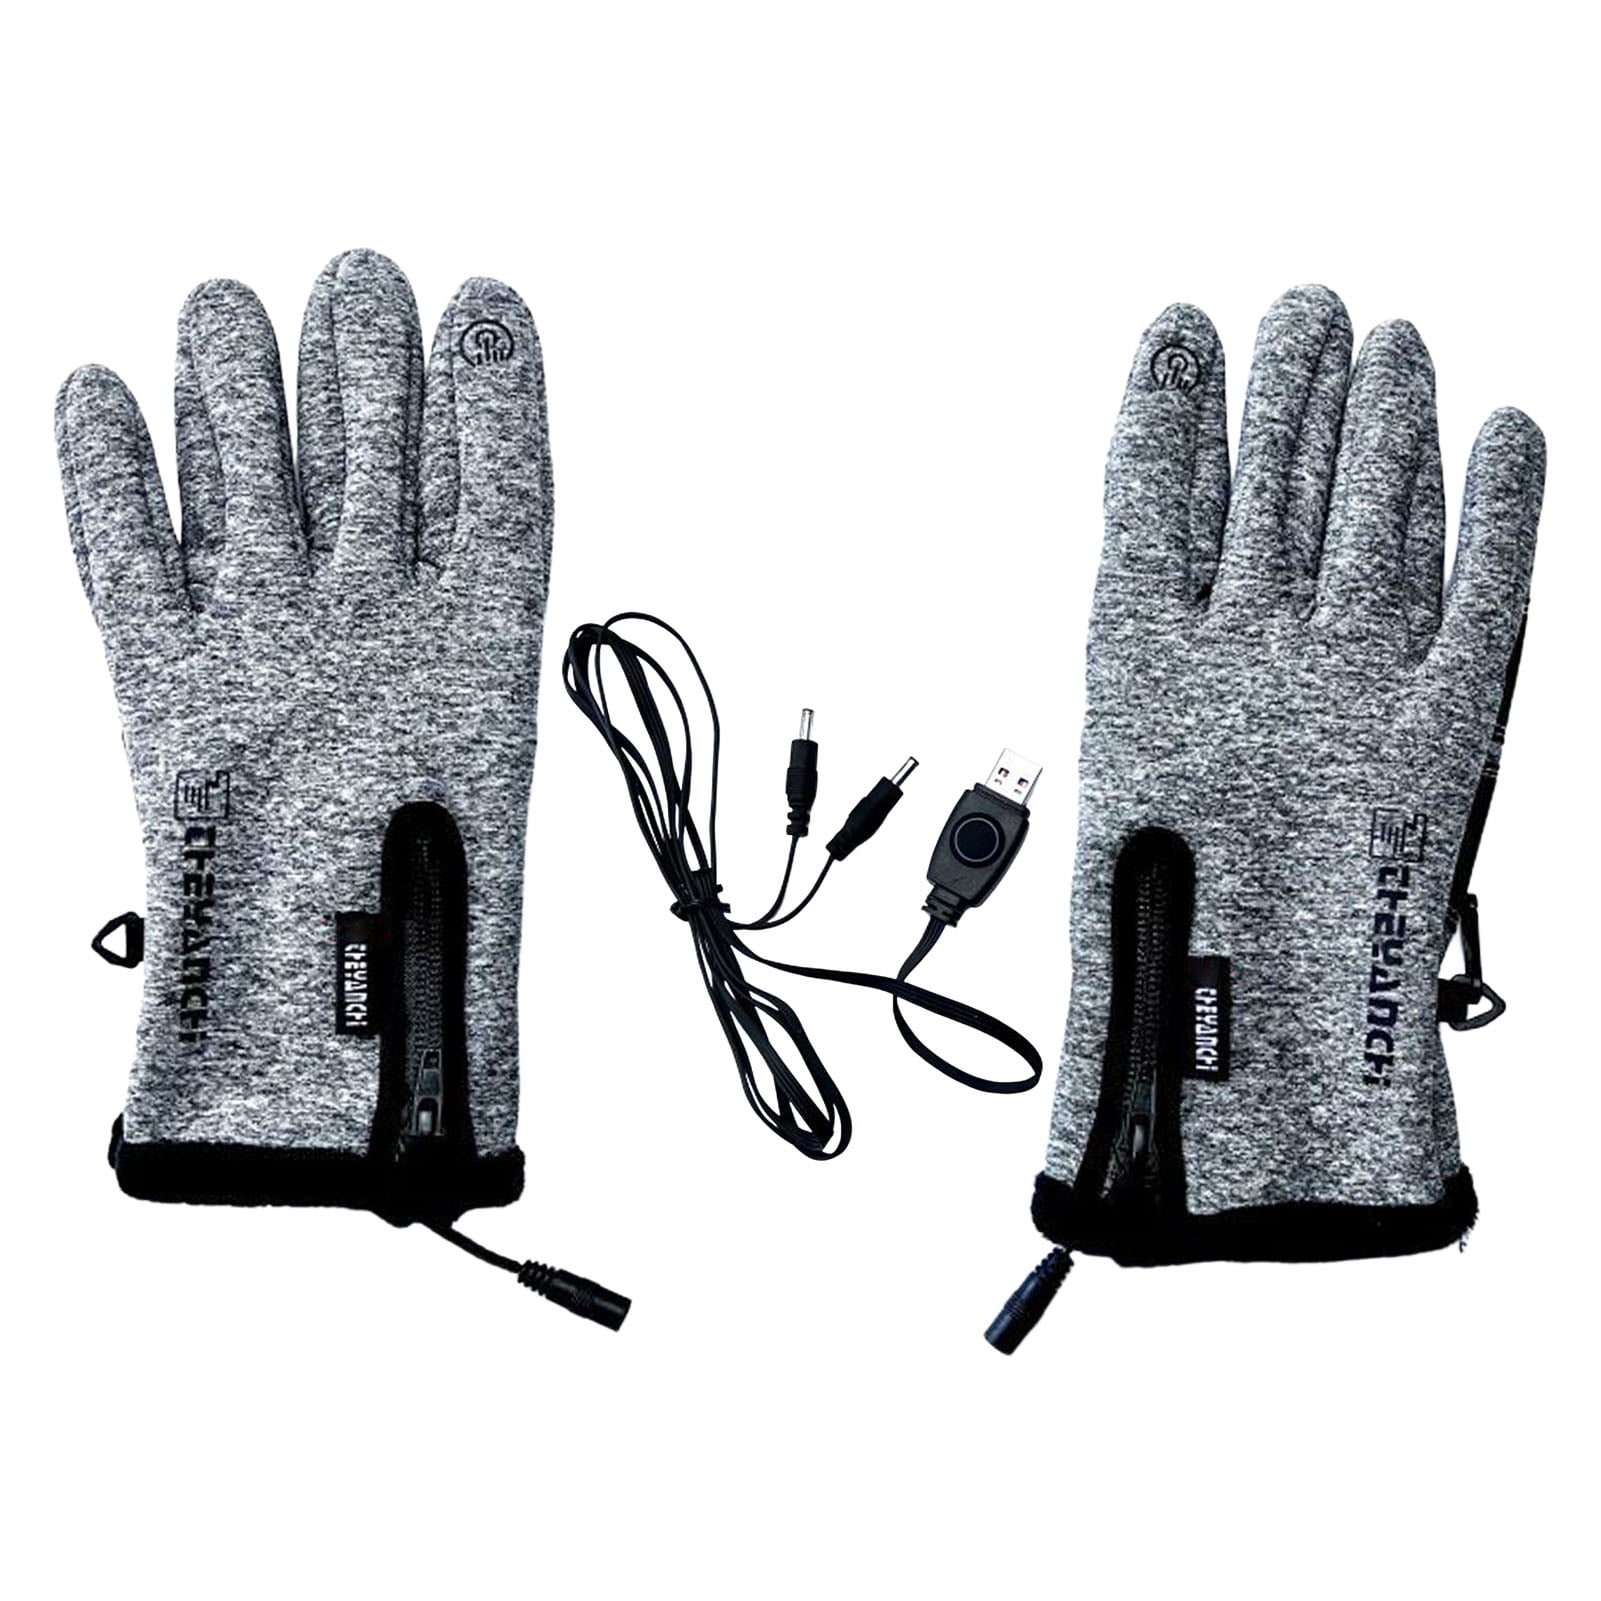 USB Heating Gloves 1 PairTouch Screen Zipper Cuffs Letter Print Fingertip  Opening Winter Adjustable Temperature Fishing Gloves,Grey